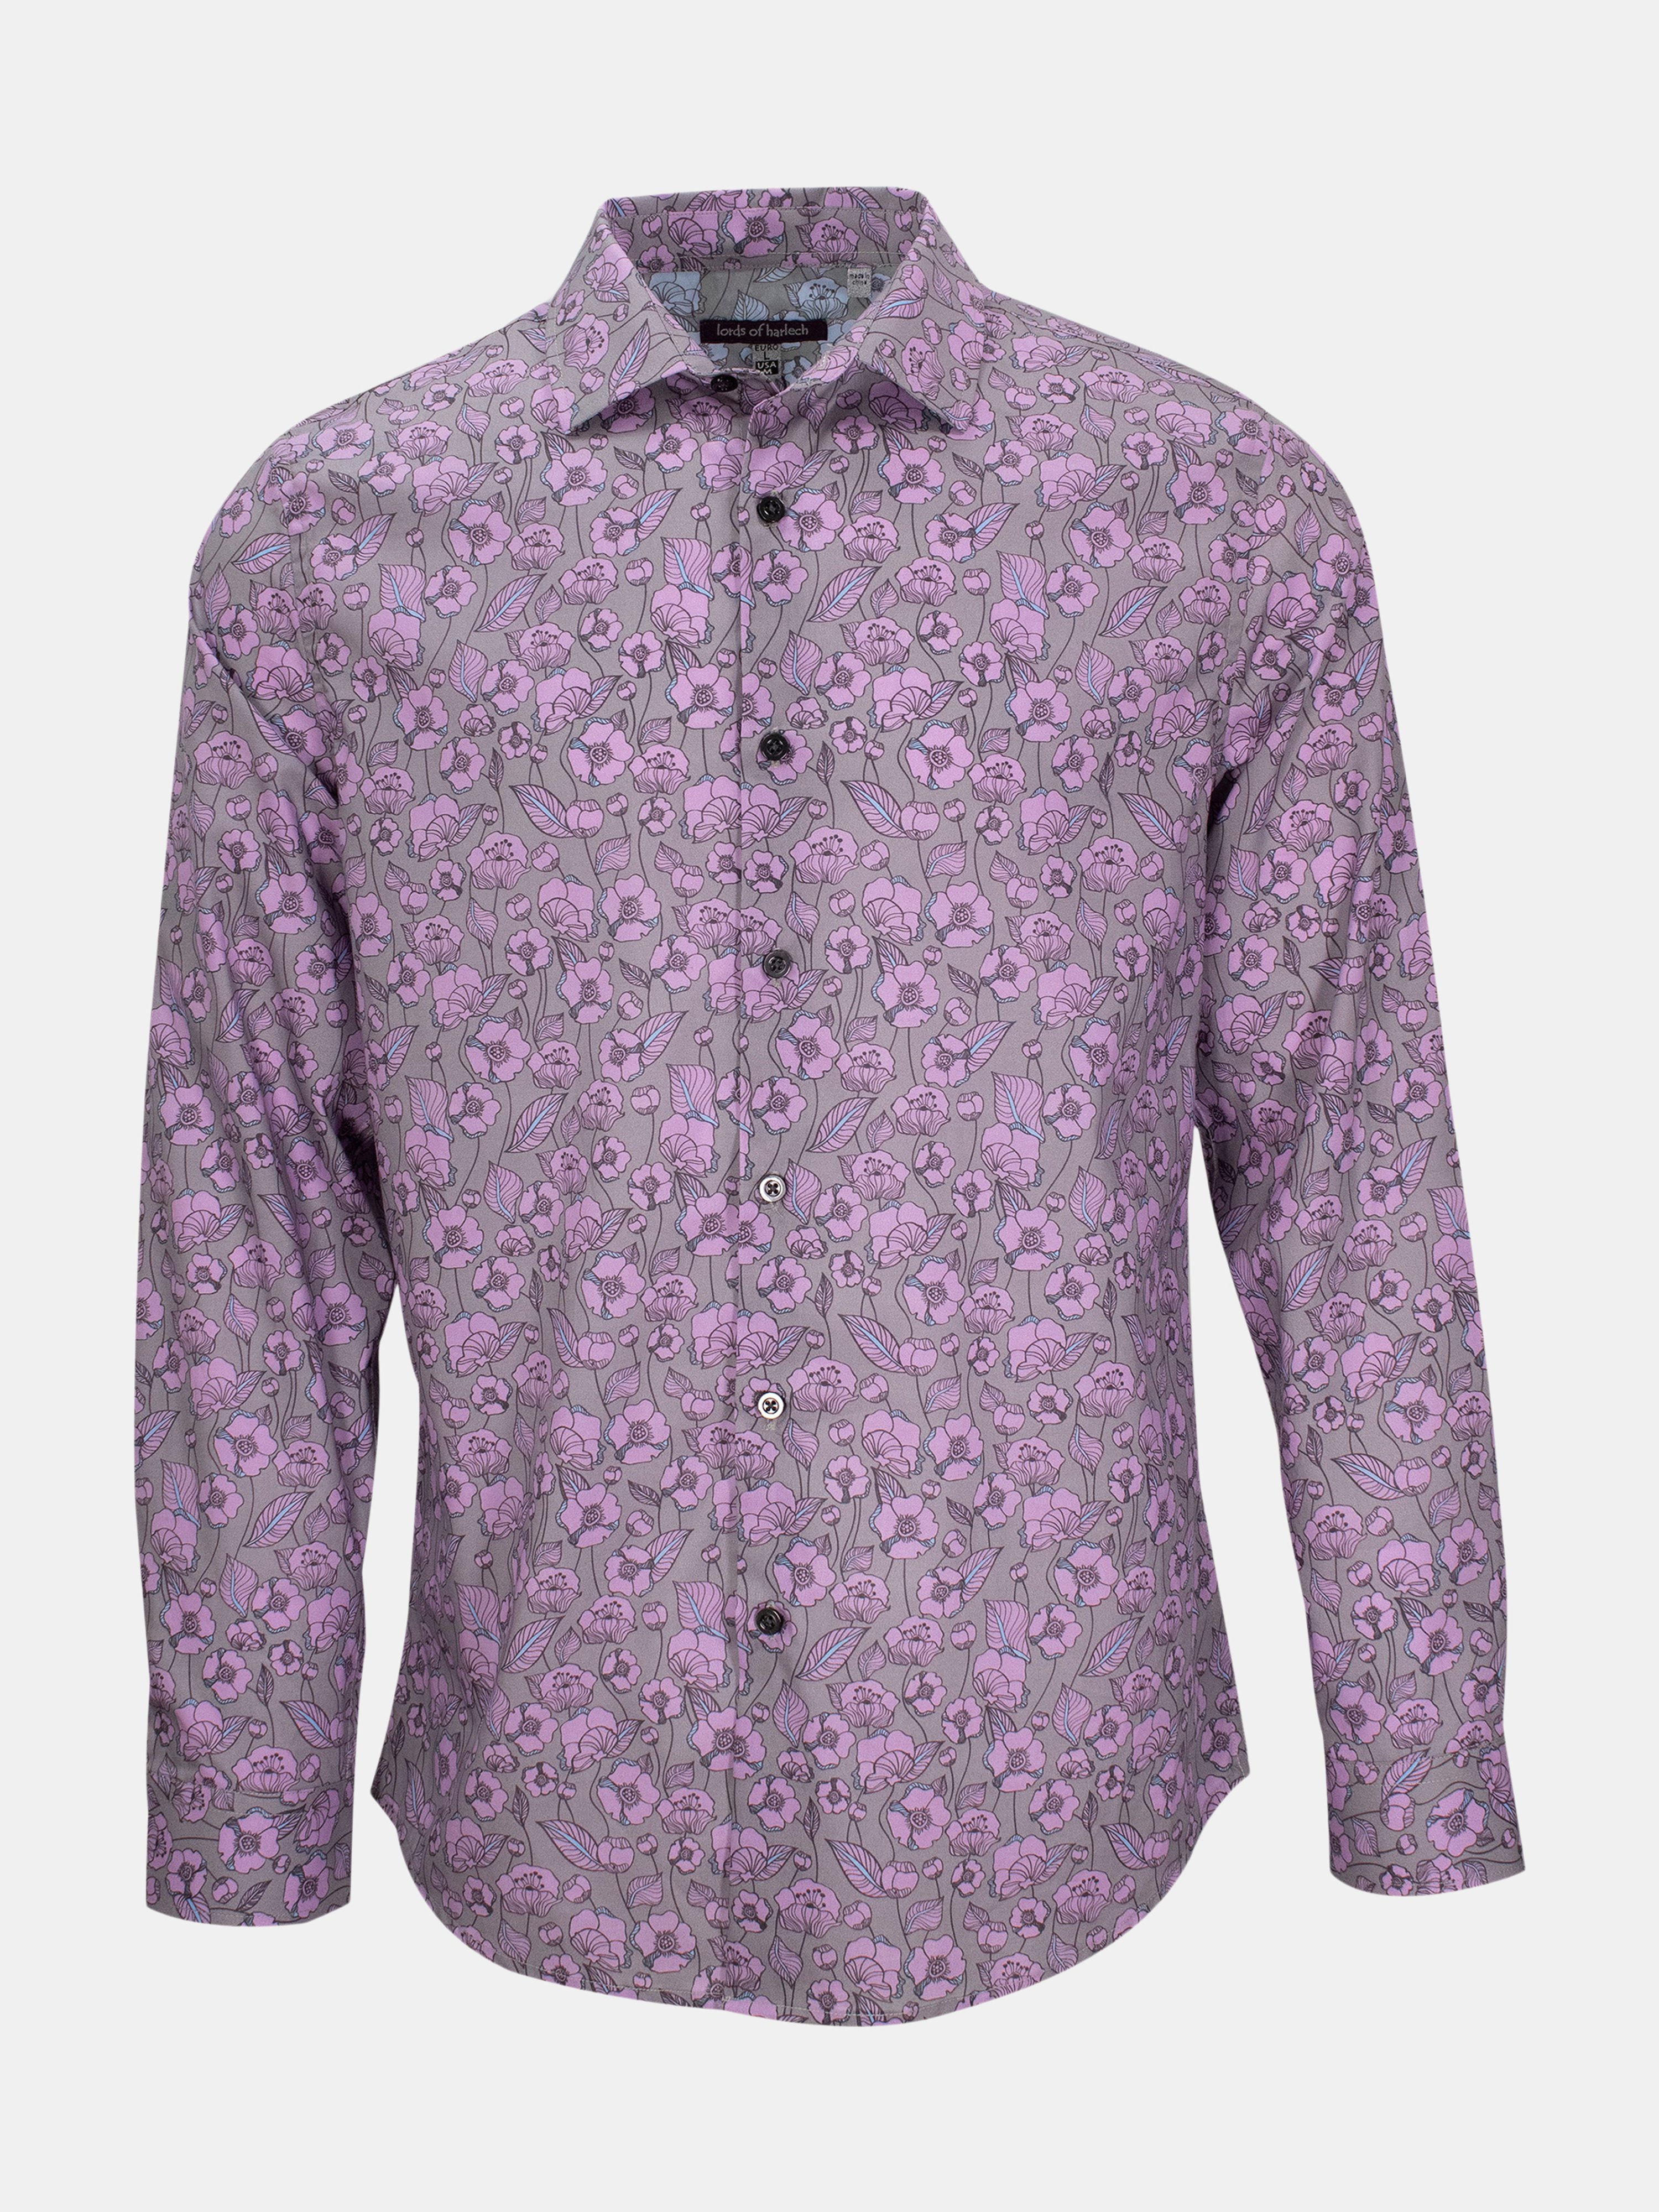 Lords Of Harlech Nigel Notorious Floral Orchid Shirt In Purple